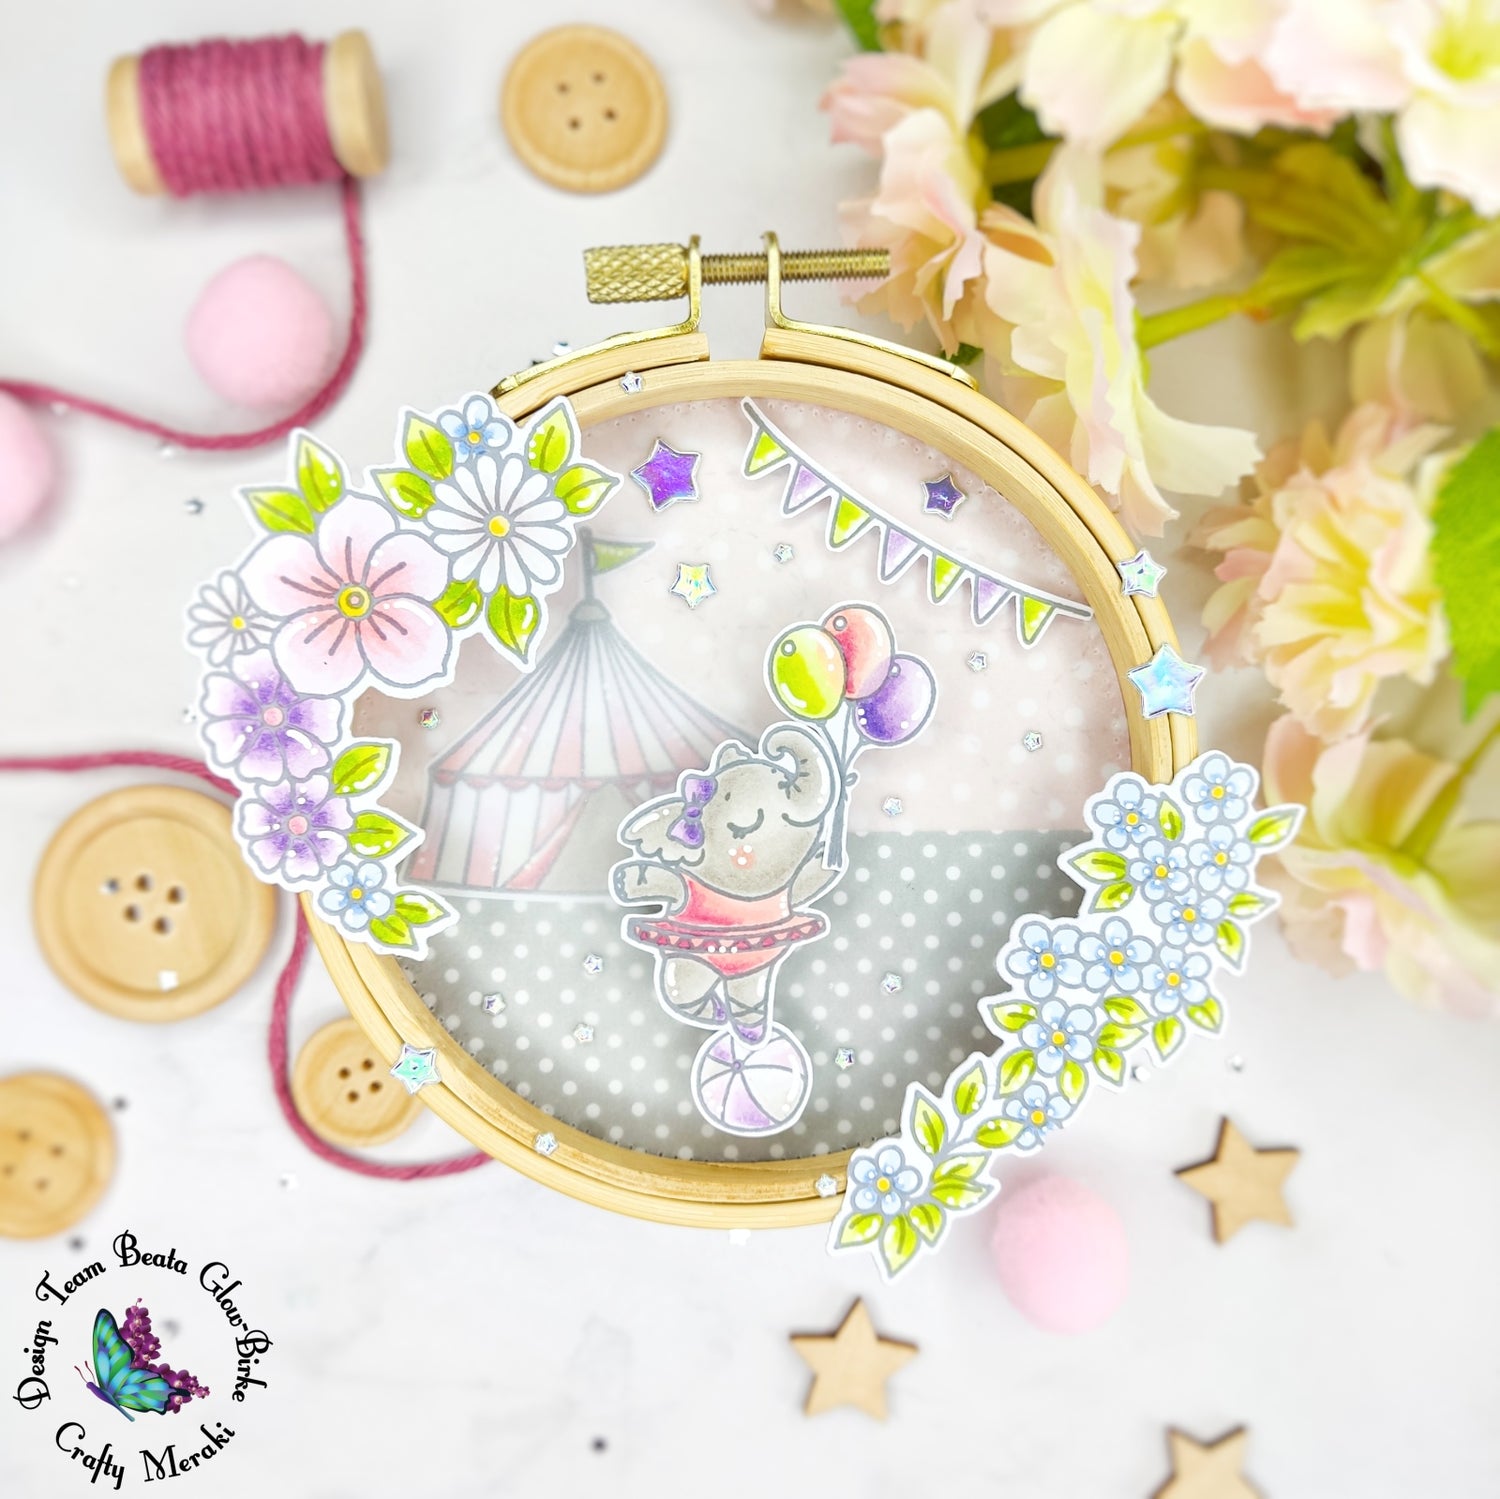 Embroidery Hoop as a base of inspiration